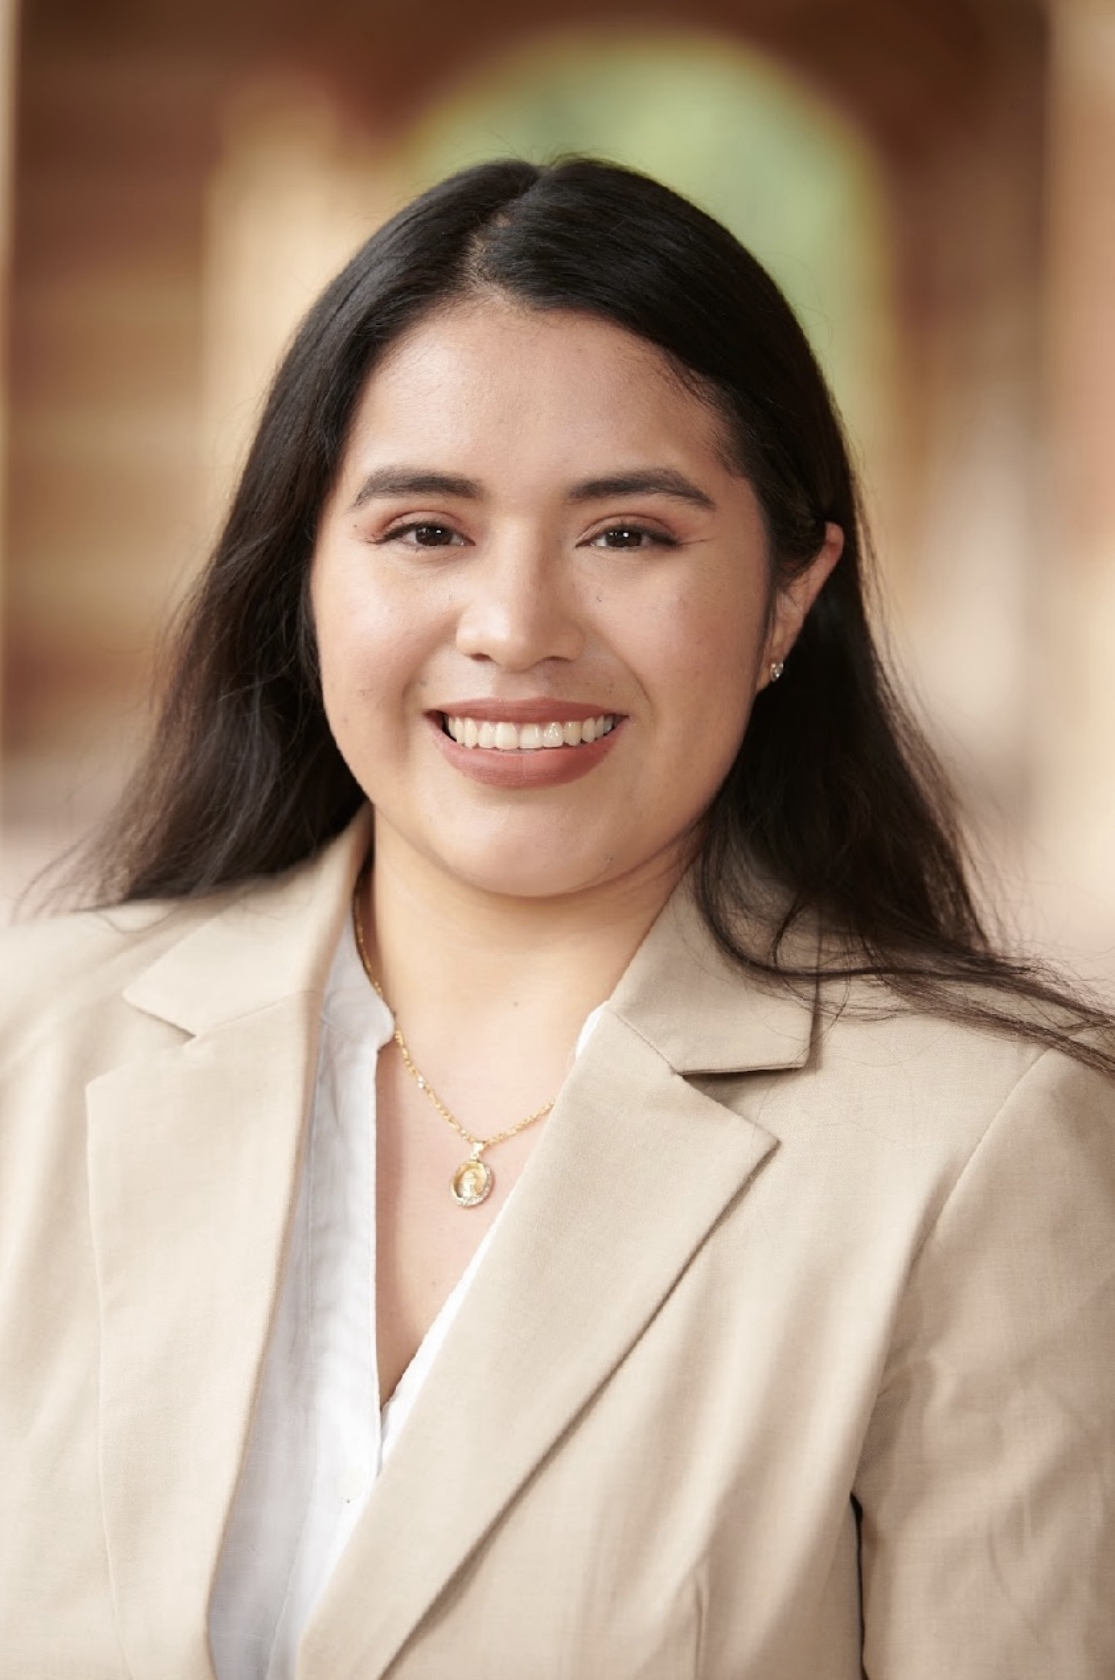 A young Hispanic woman in a tan suit is smiling